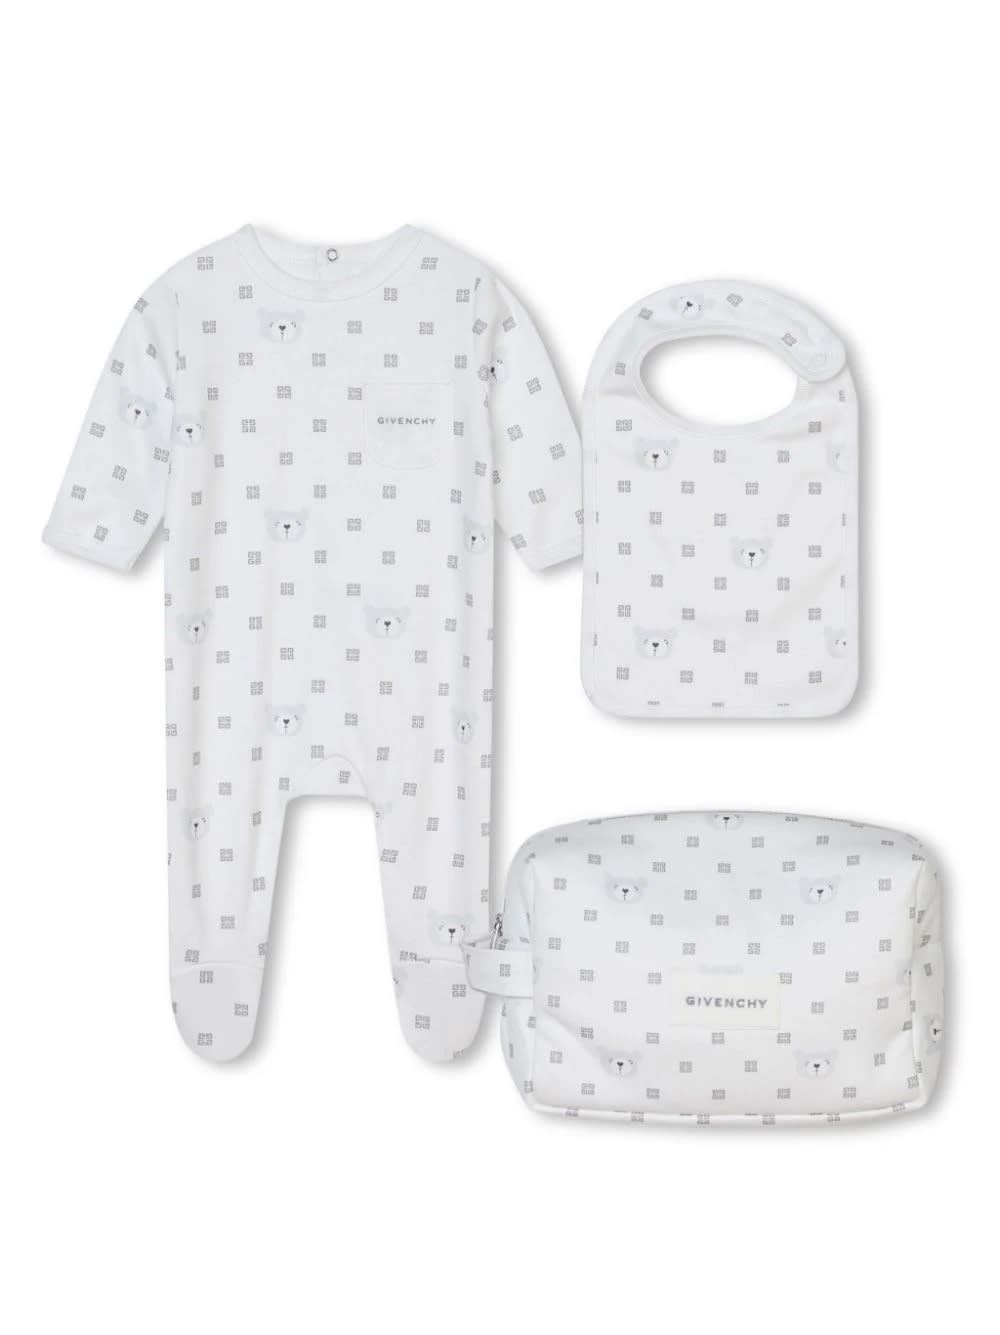 Shop Givenchy Gift Set With Pyjamas, Bib And Trousse In 4g Cotton In White